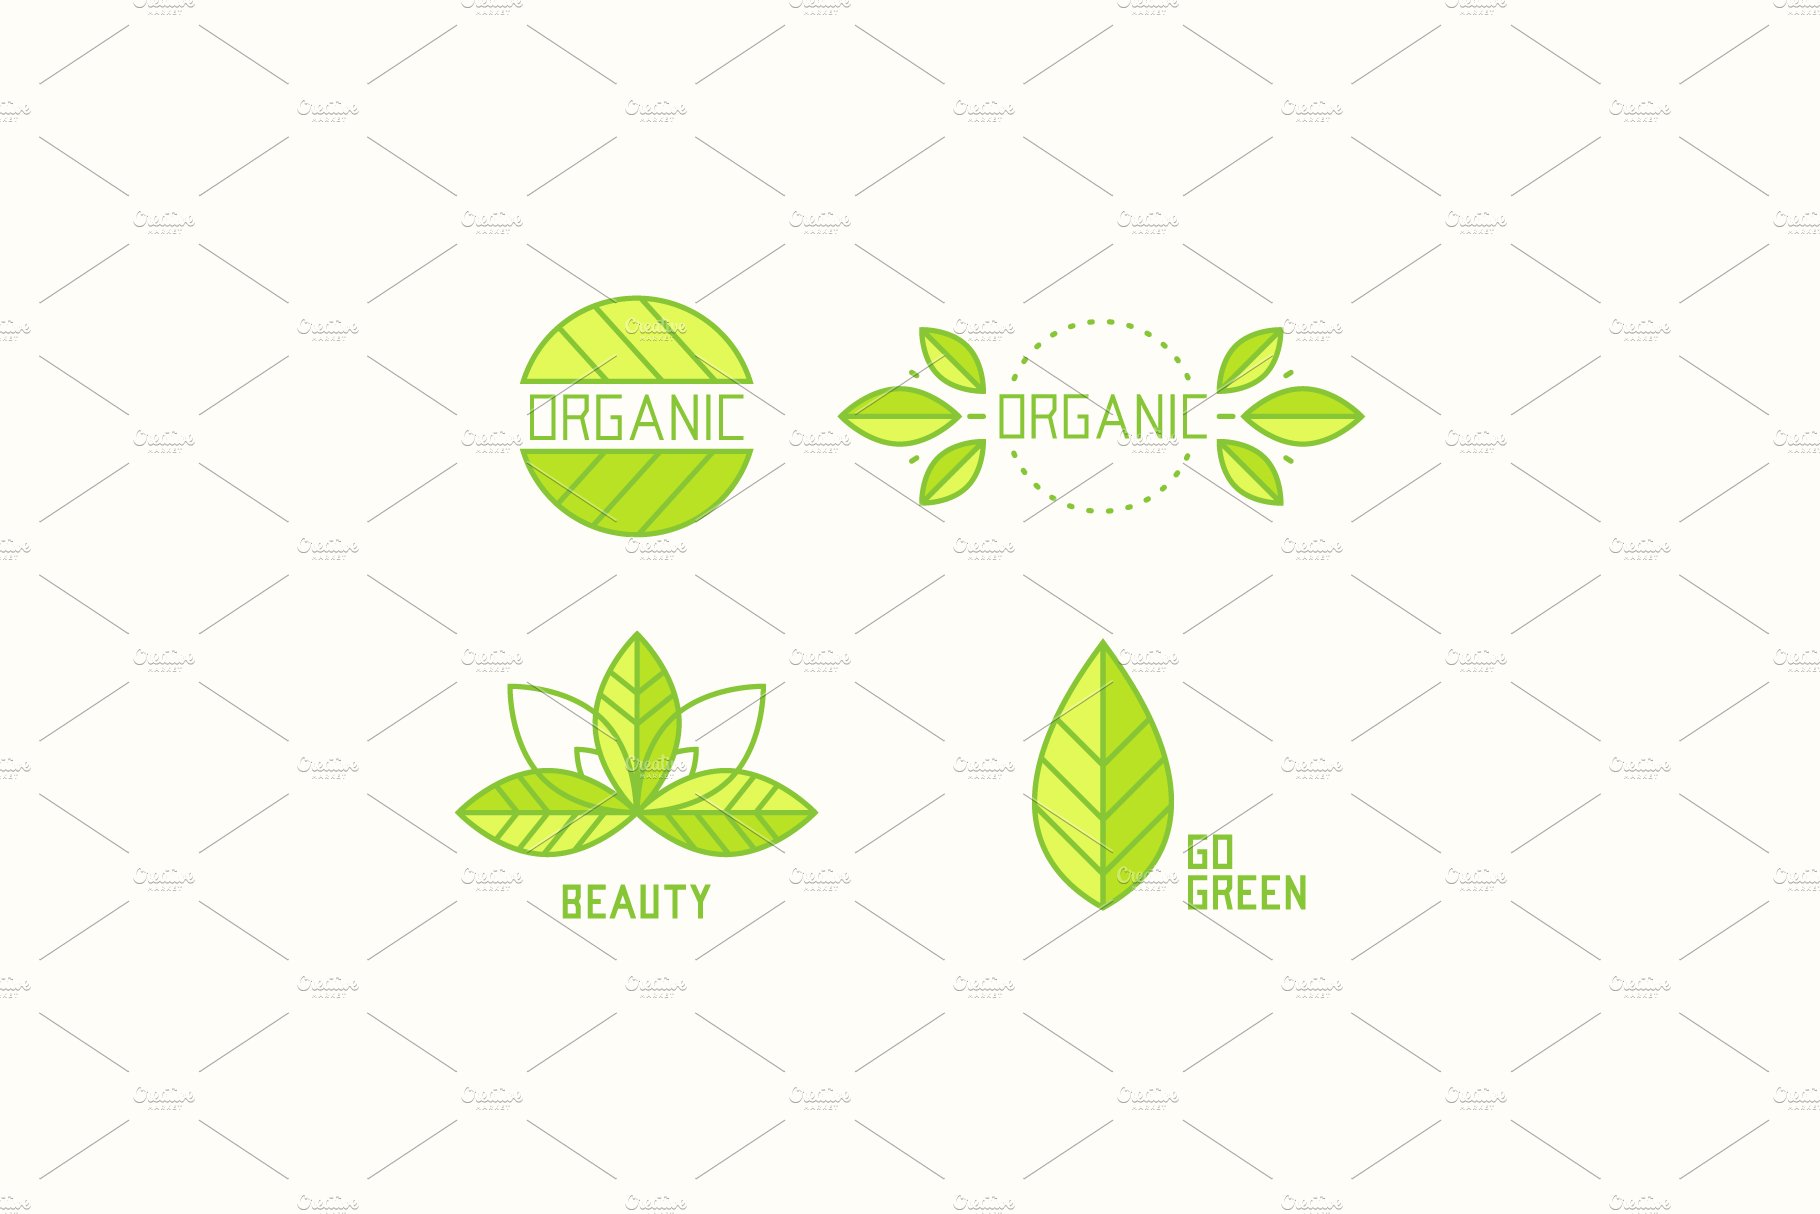 Collection of organic logos cover image.